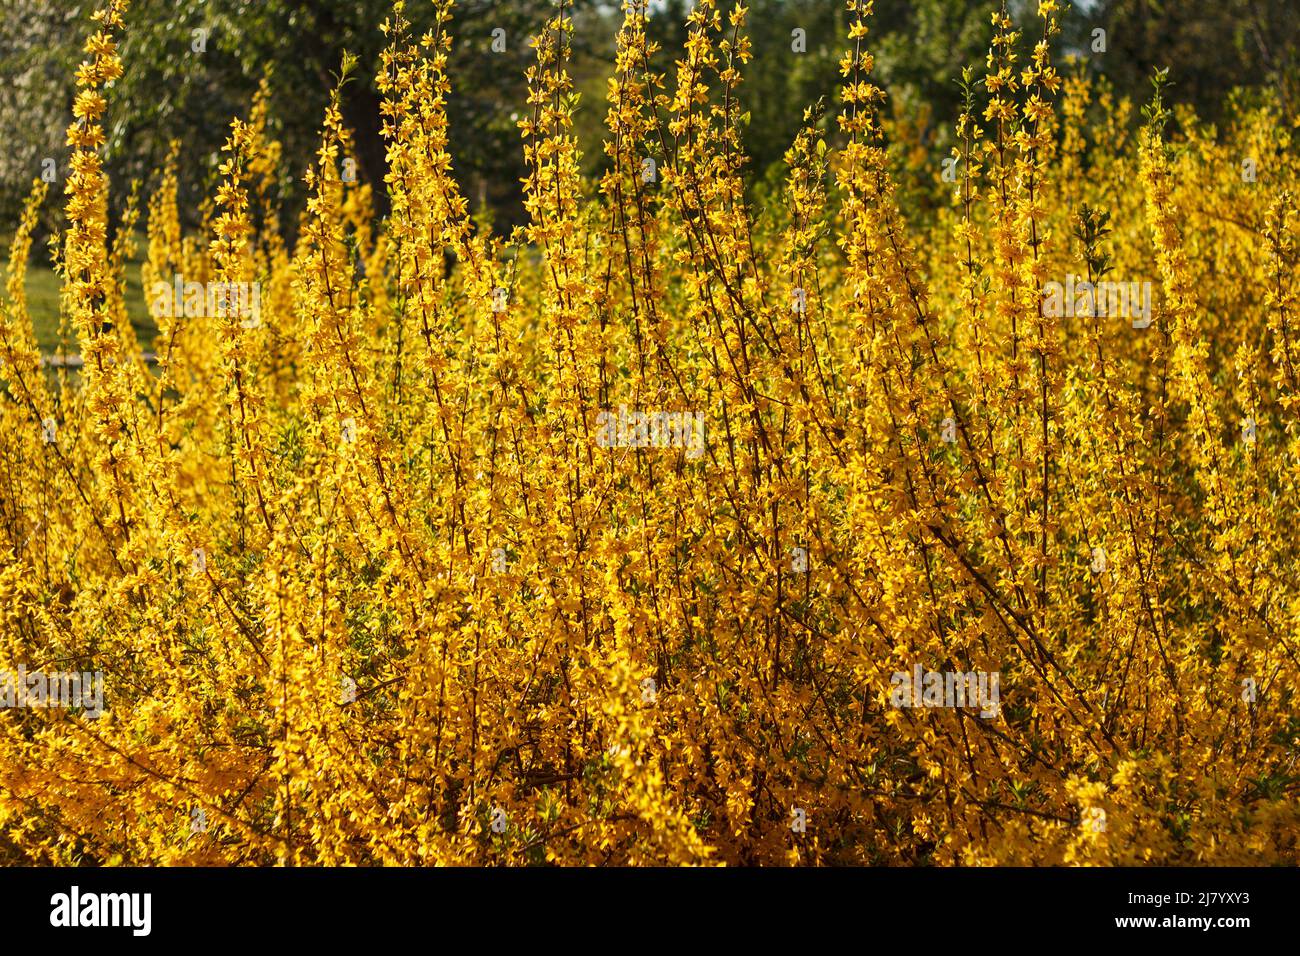 Forsythia shrub tree, genus olive, beautifully blooms in spring with yellow flowers in the spring season Stock Photo